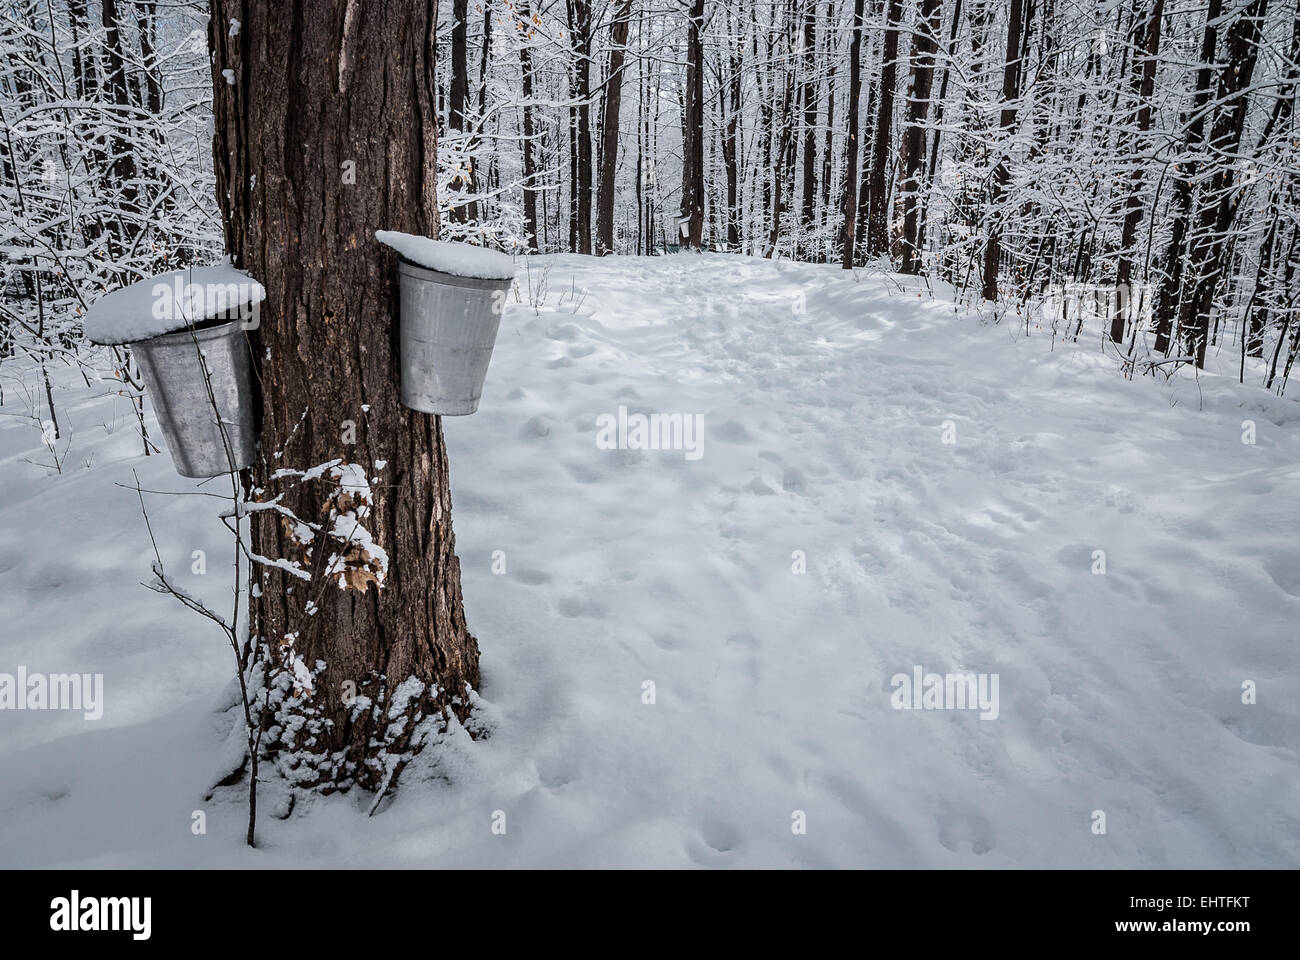 Buckets on trees await the annual spring flow of sap from maple trees. Stock Photo